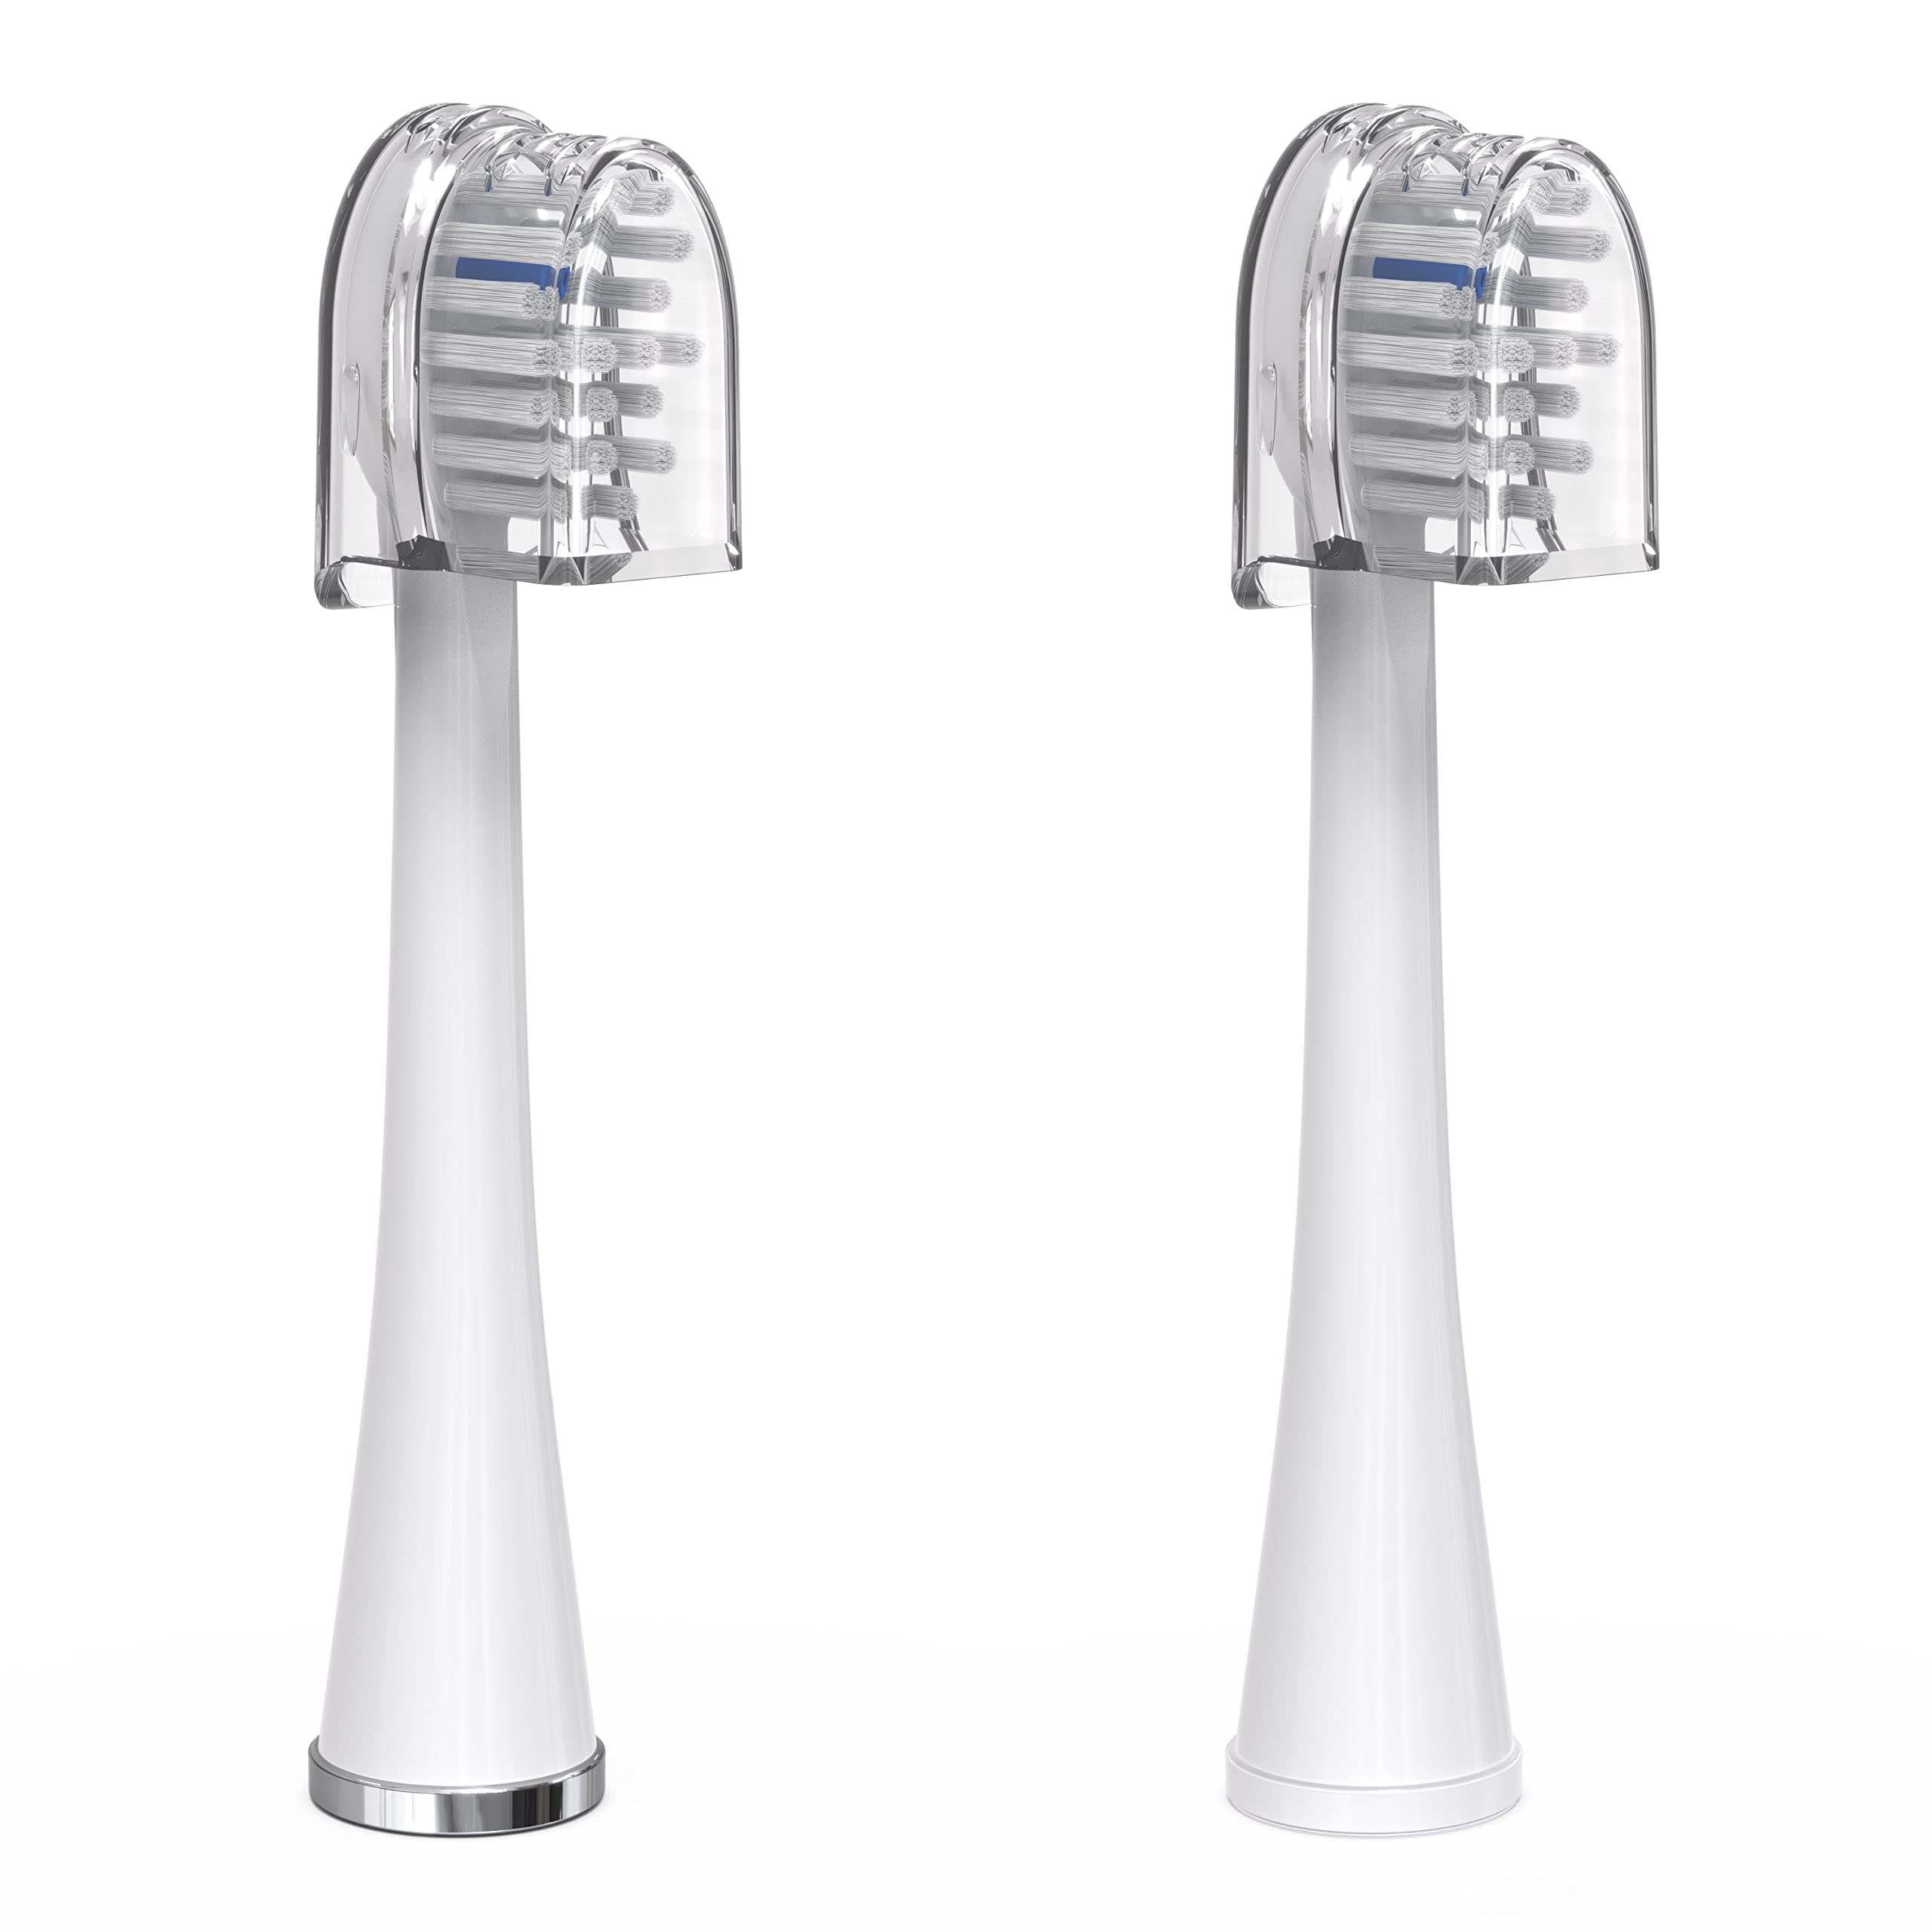 Waterpik Compact Replacement Brush Heads With Covers for Sonic-Fusion Flossing Toothbrush SFRB-2EW, 2 Count White